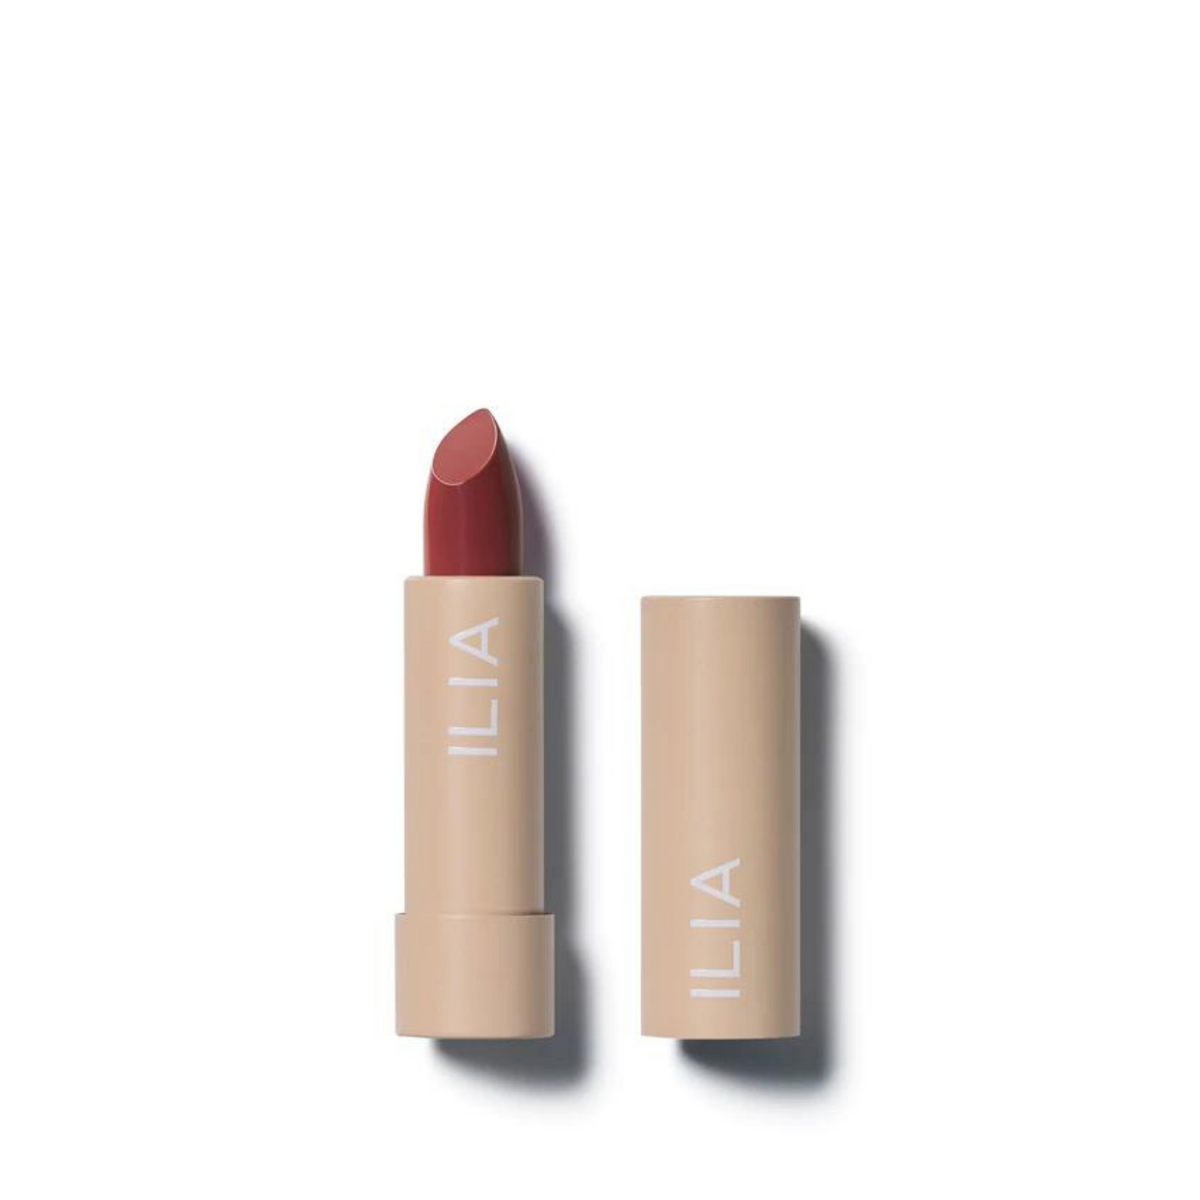 Primary Image of Color Block Lipstick - Rosewood